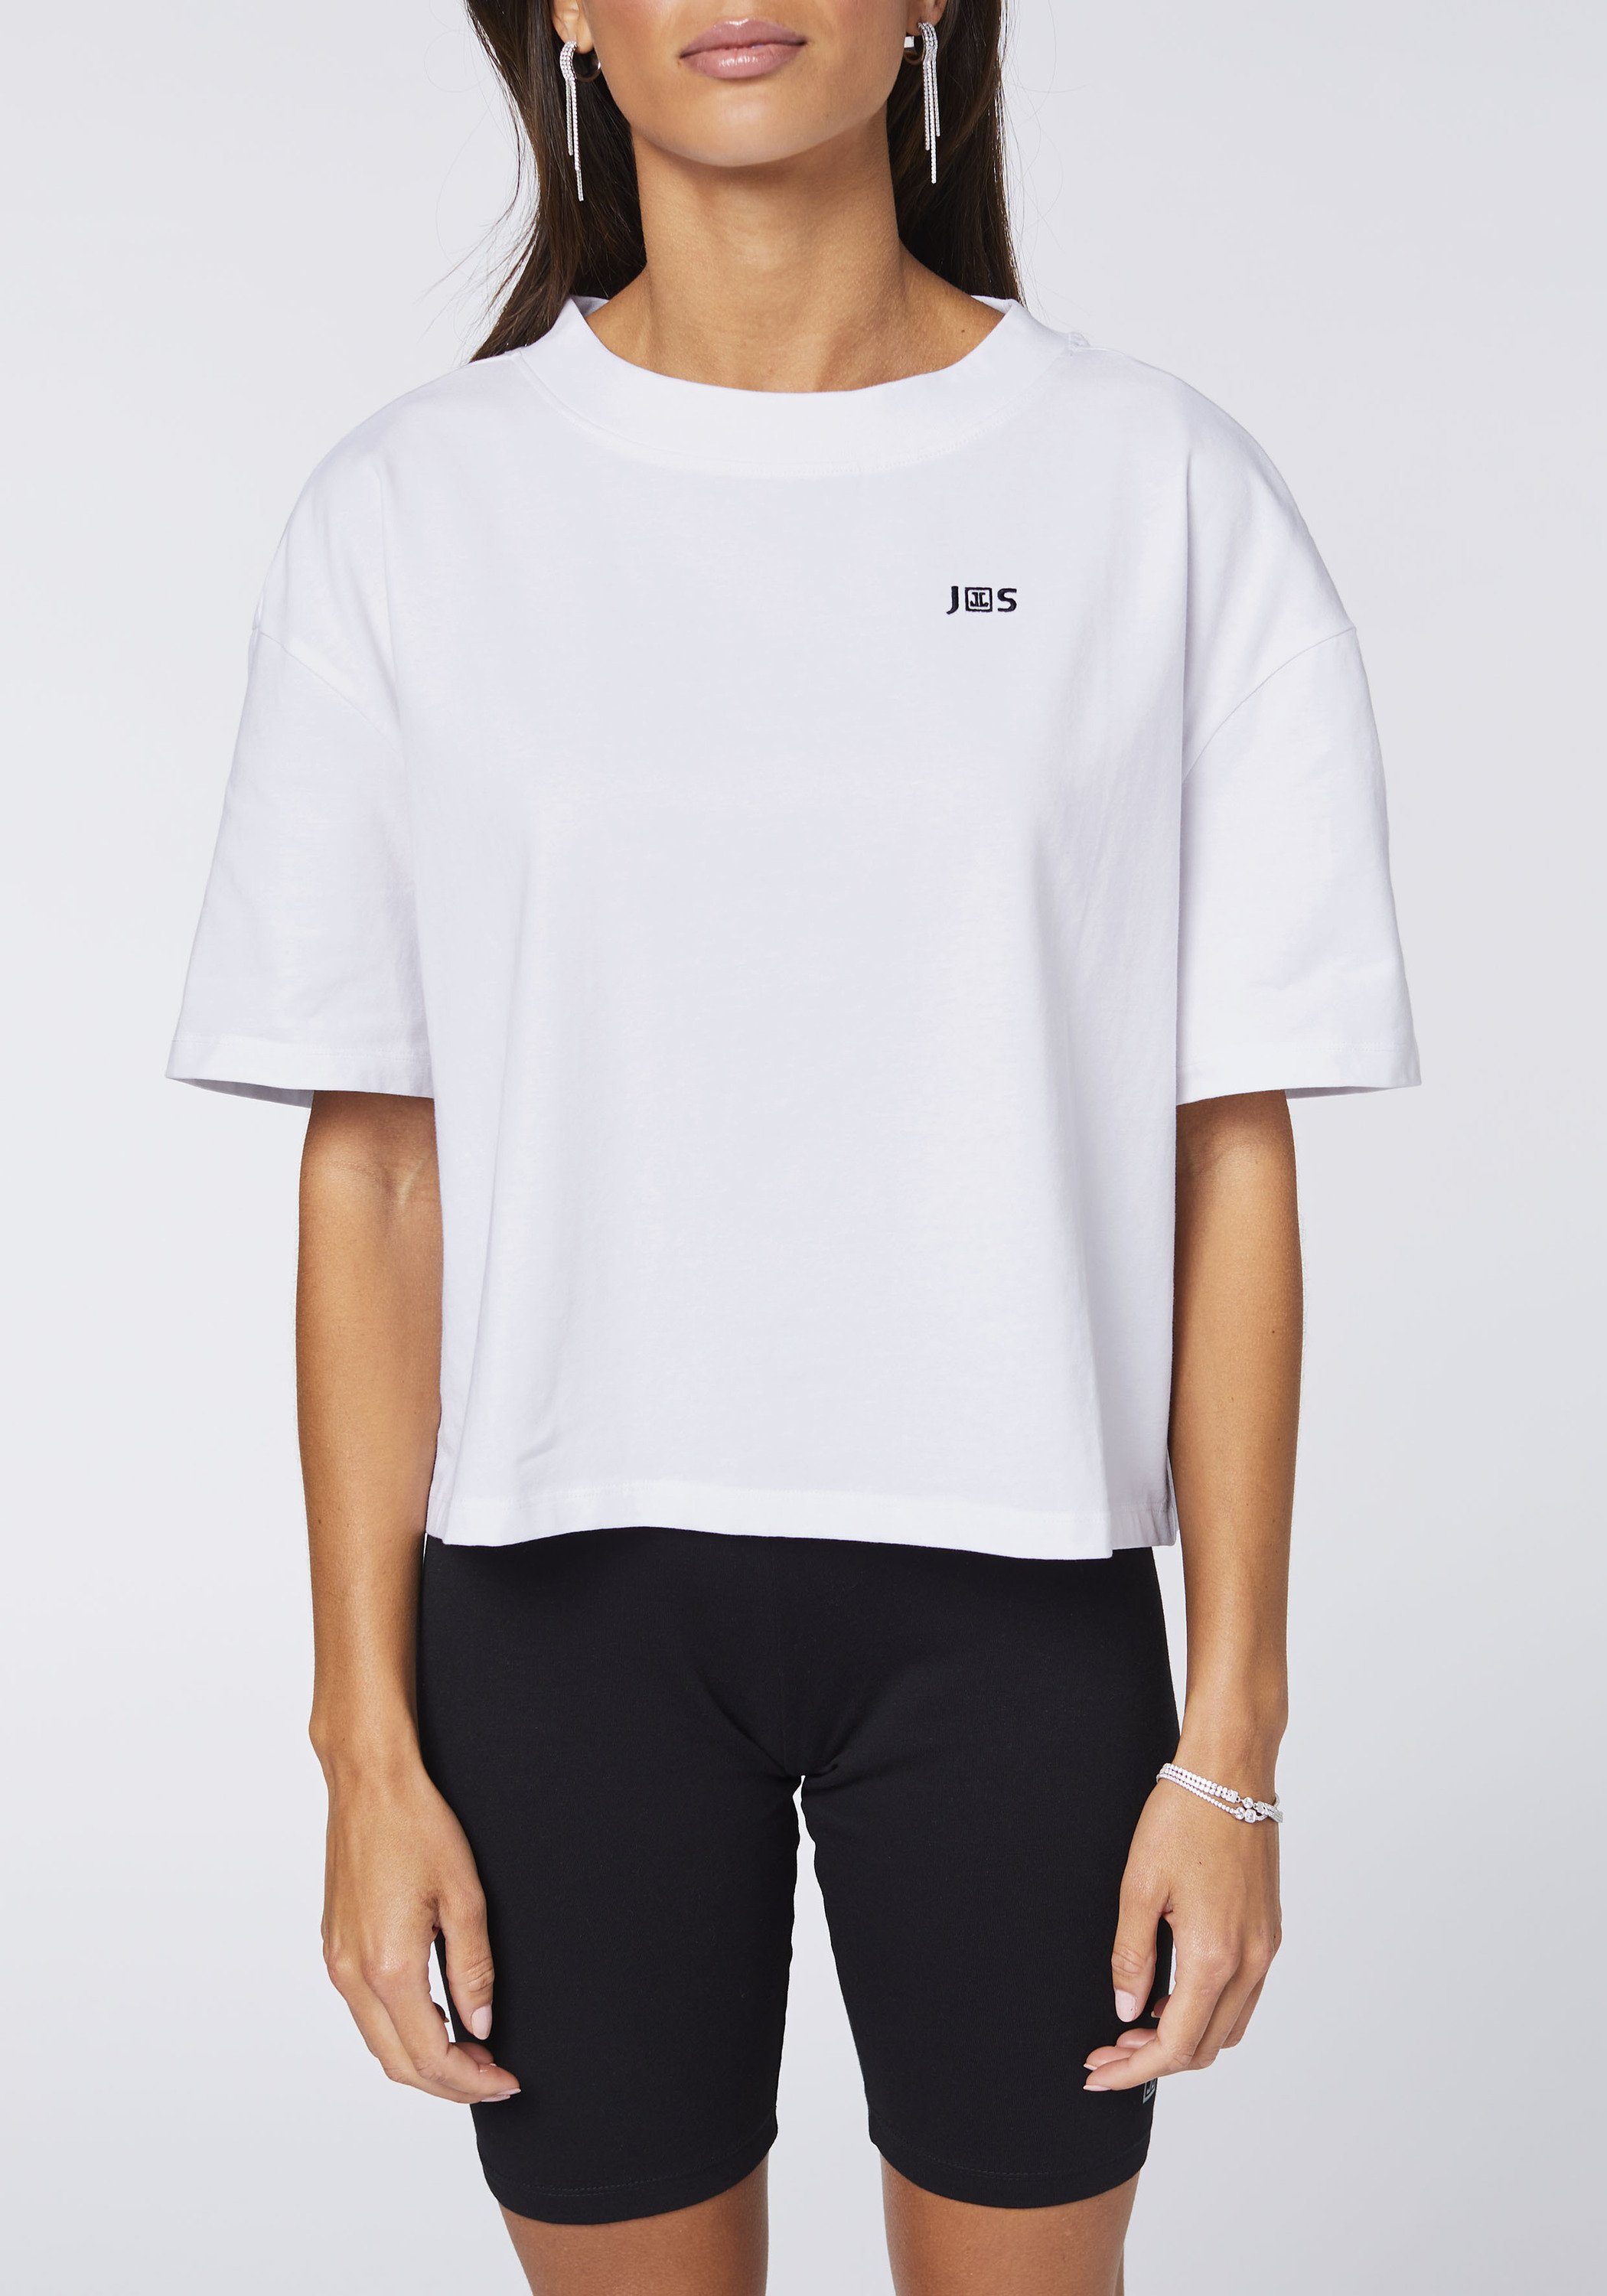 JETTE 11-0601 in SPORT White Bright Print-Shirt Länge cropped